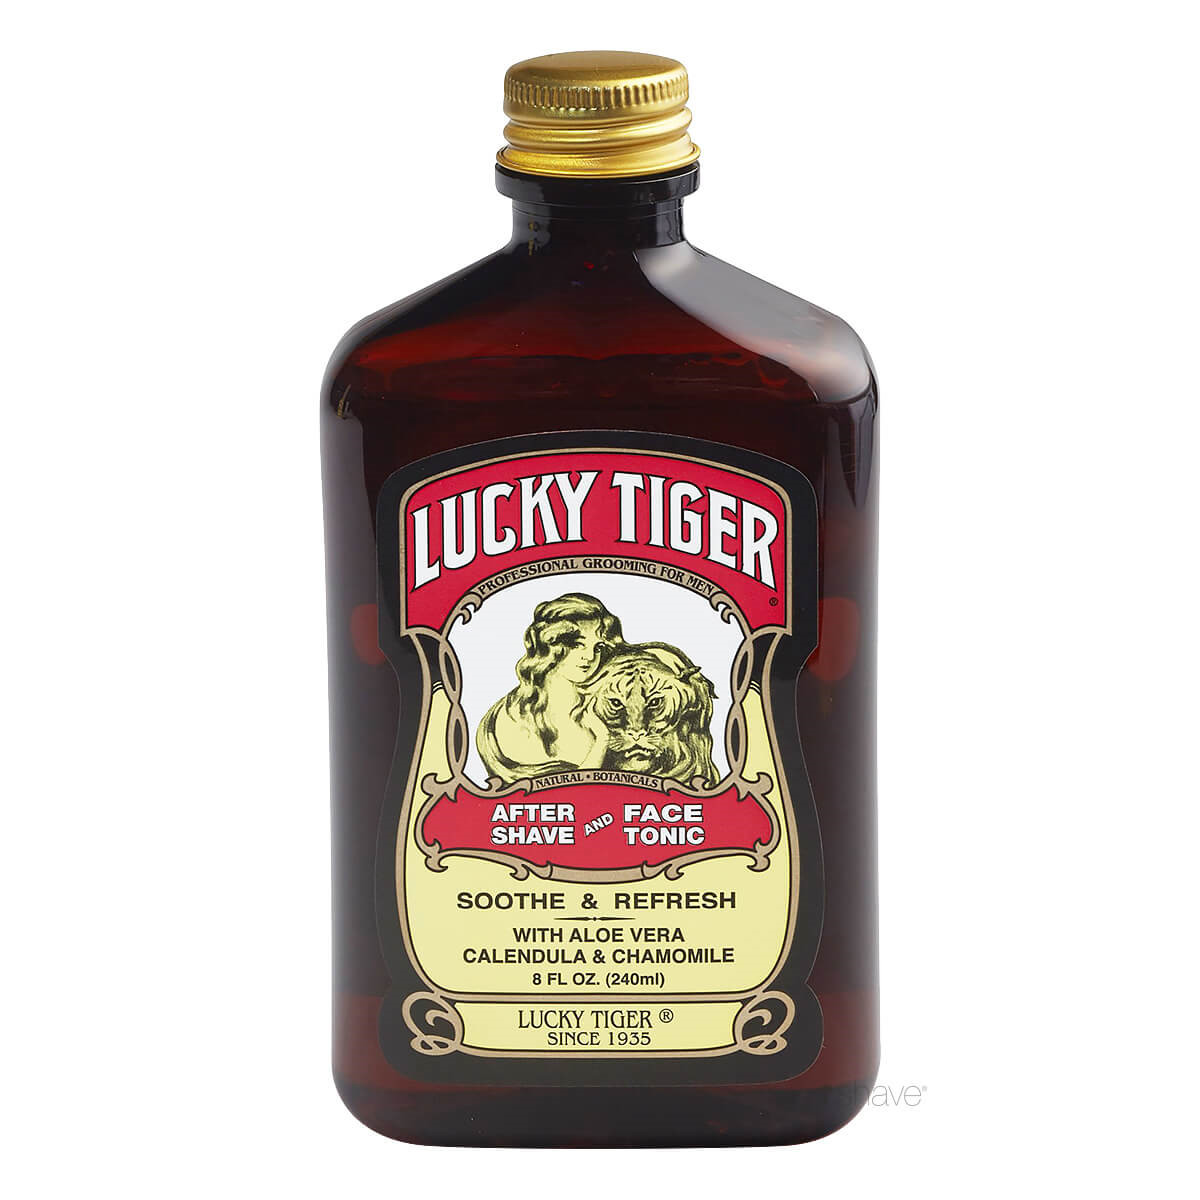 Lucky Tiger Aftershave & Face Tonic, 240 ml.